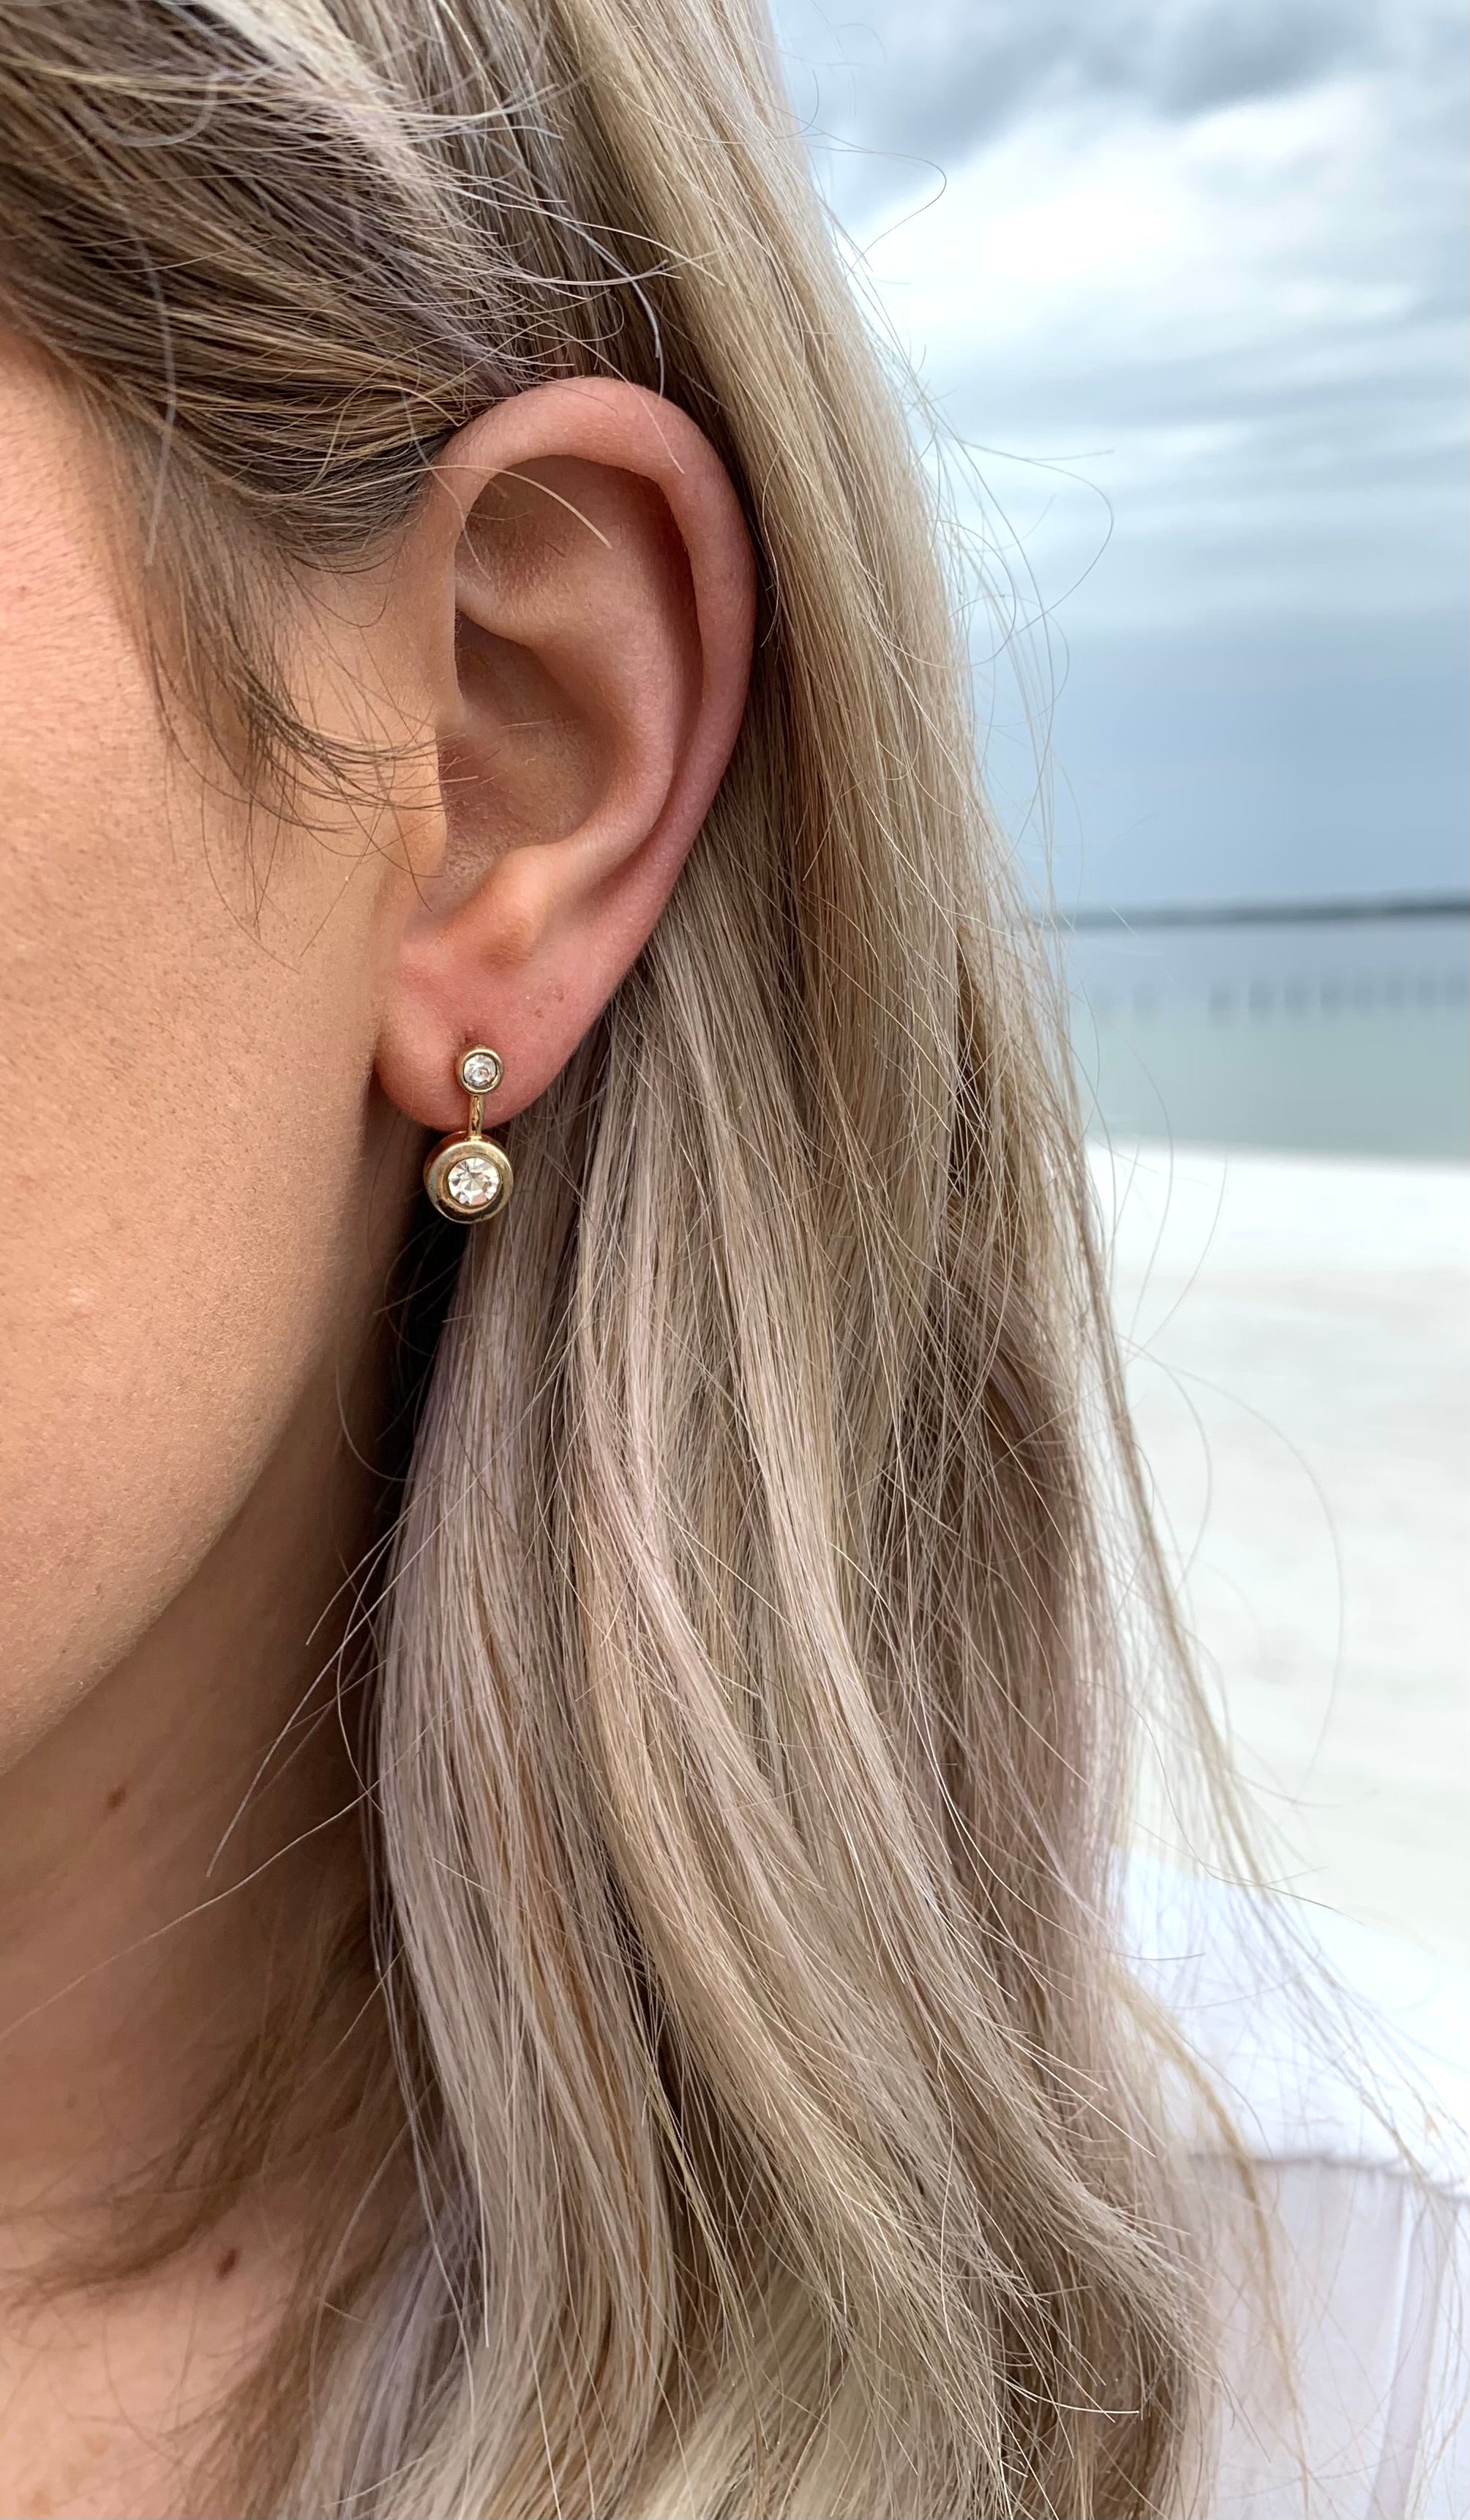 Karen stud earrings in gold with tiny crystals on ear